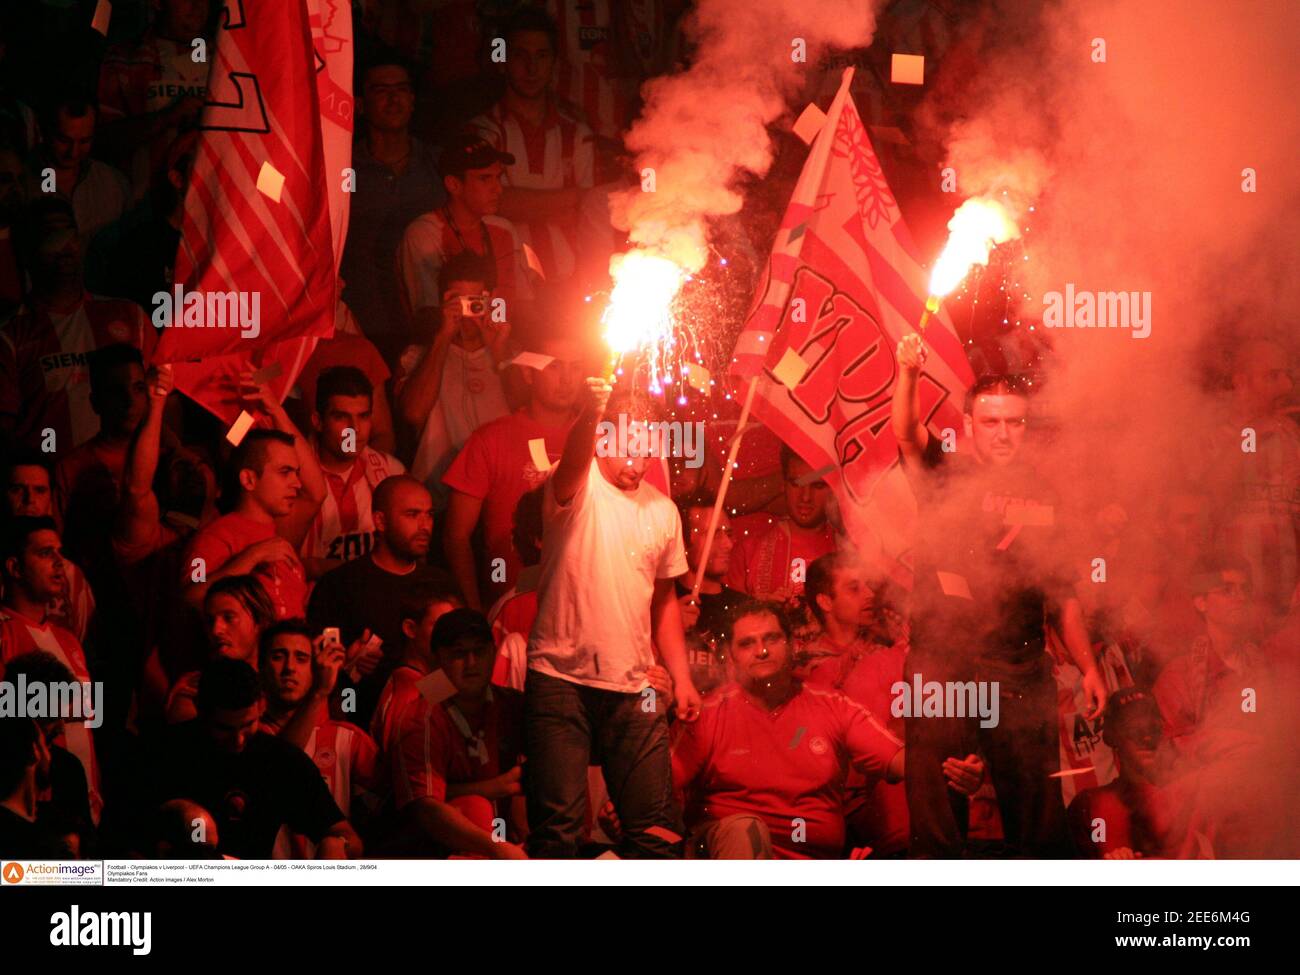 Olympiakos V Liverpool High Resolution Stock Photography and Images - Alamy